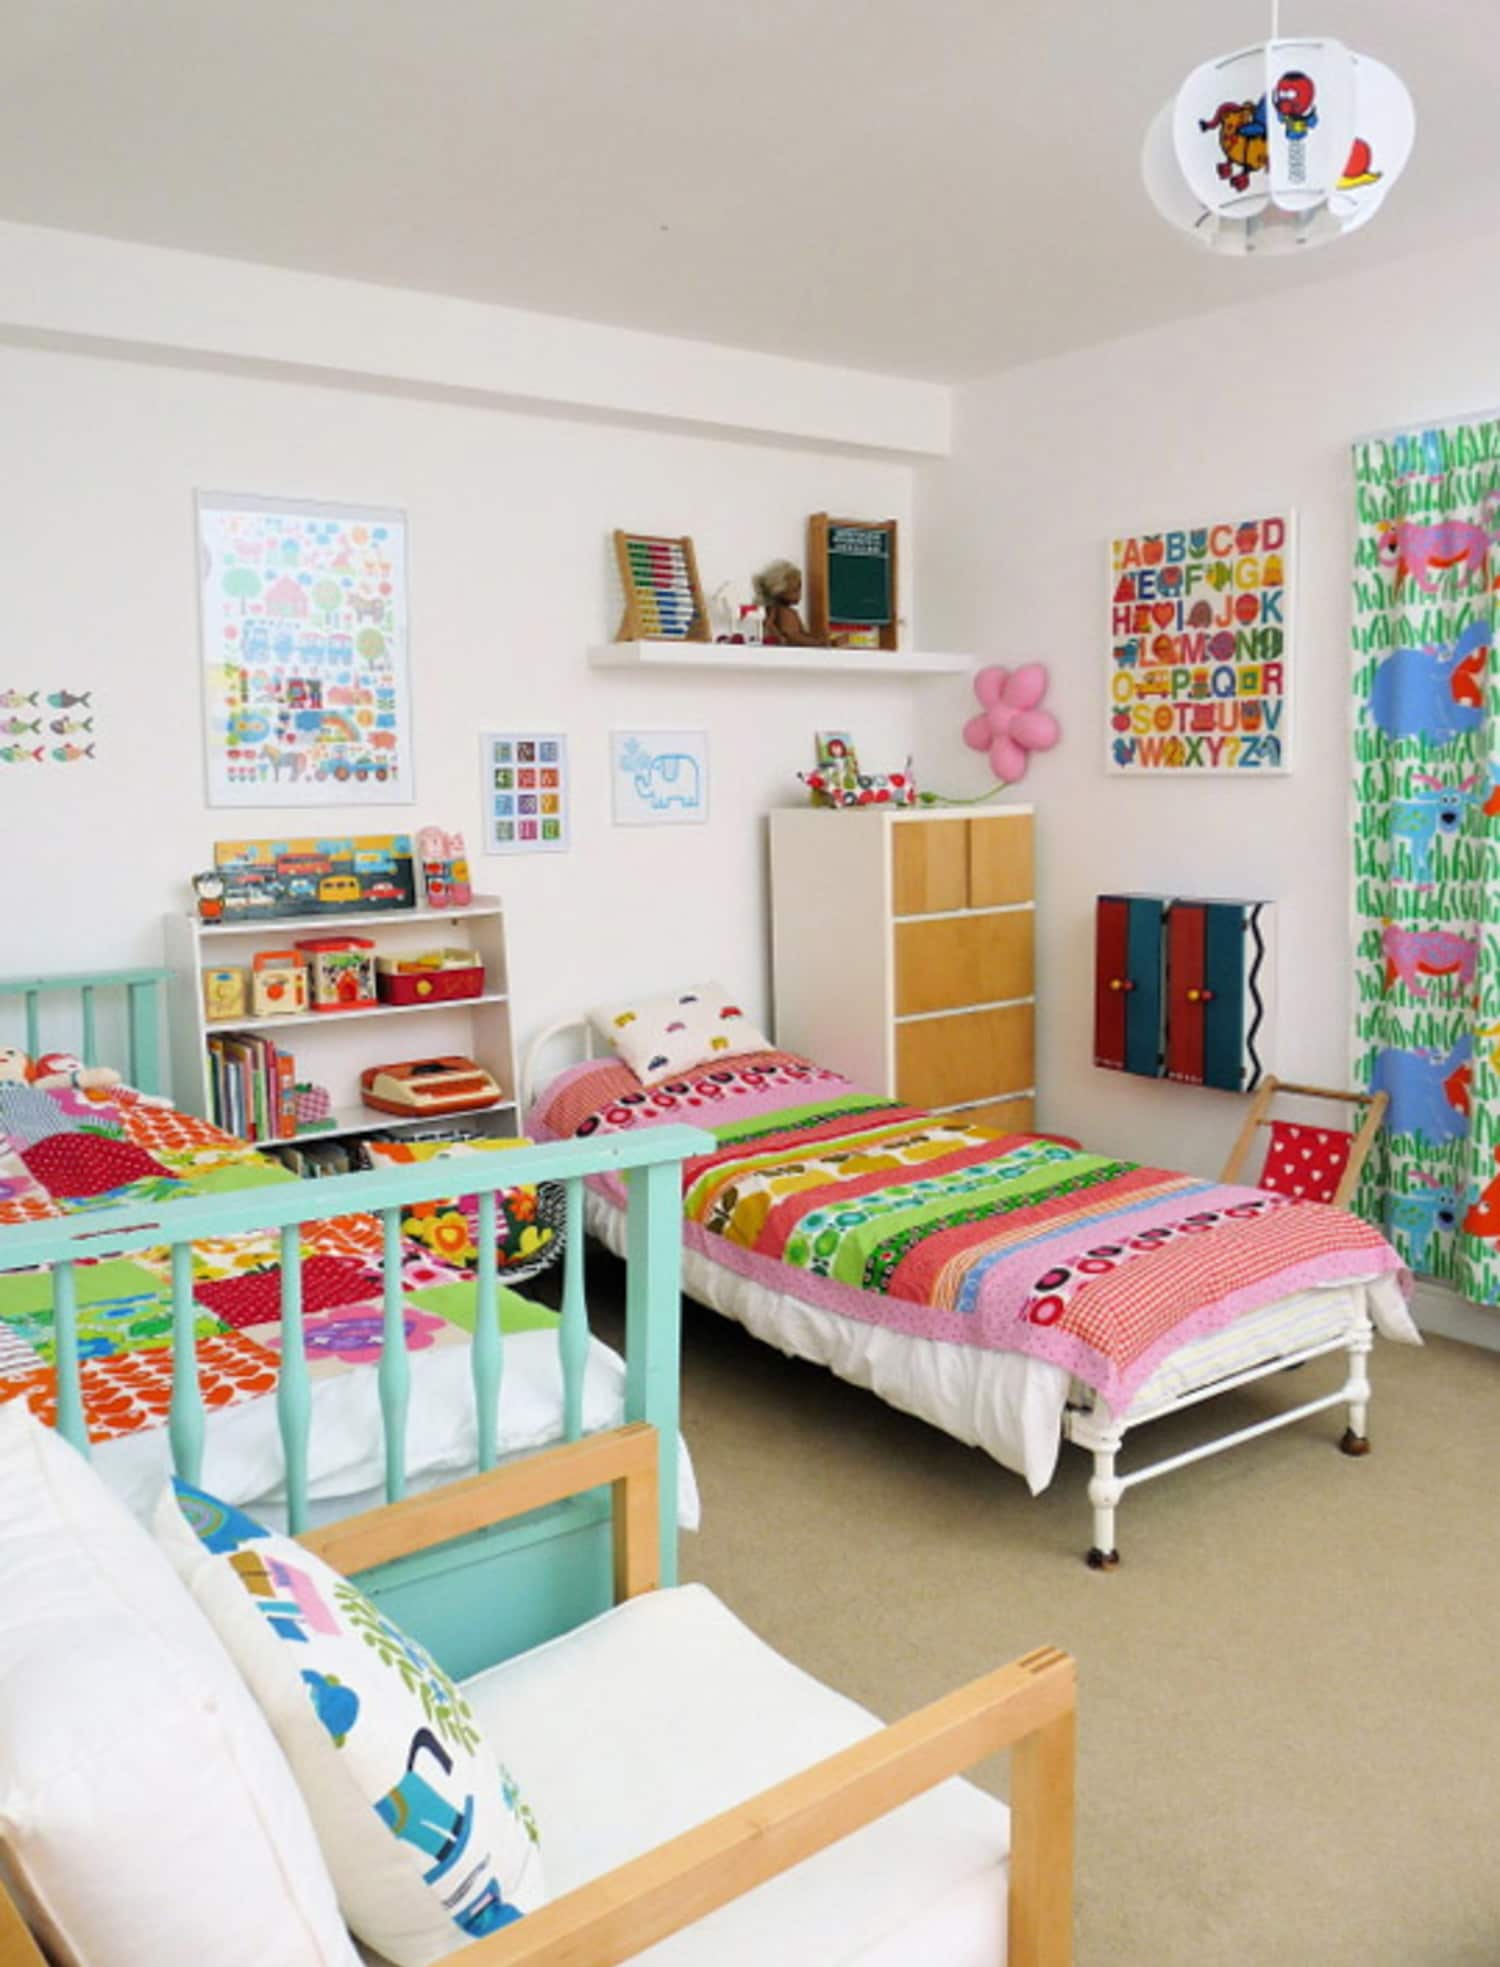  Apartment Therapy Kids With Luxury Interior